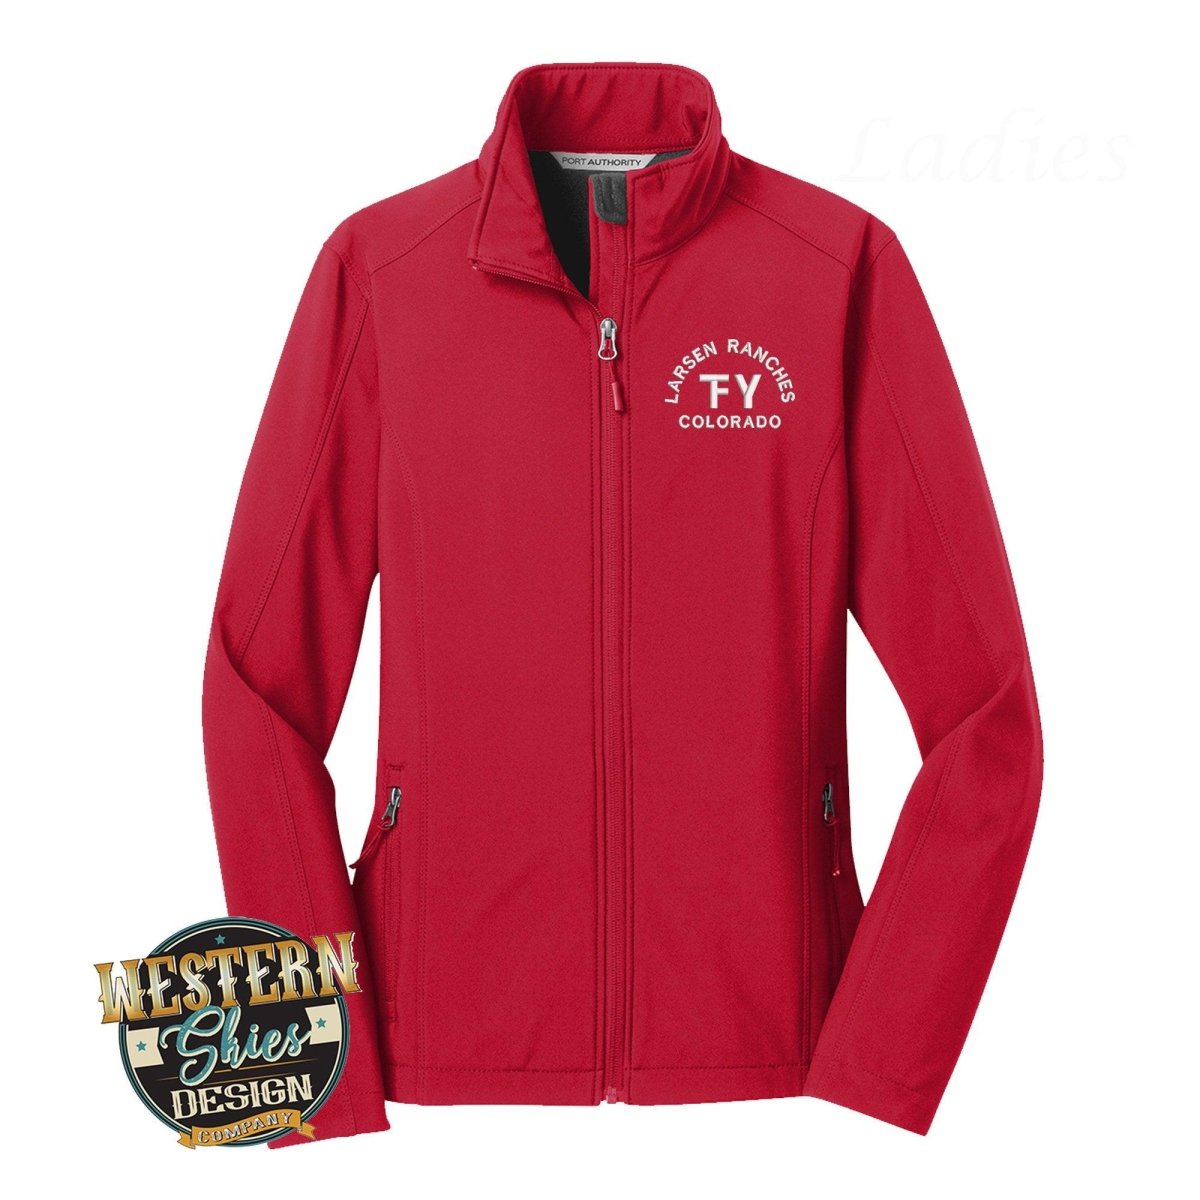 Port Authority® Ladies Hybrid Soft Shell Jacket – Powered By TSP Stores